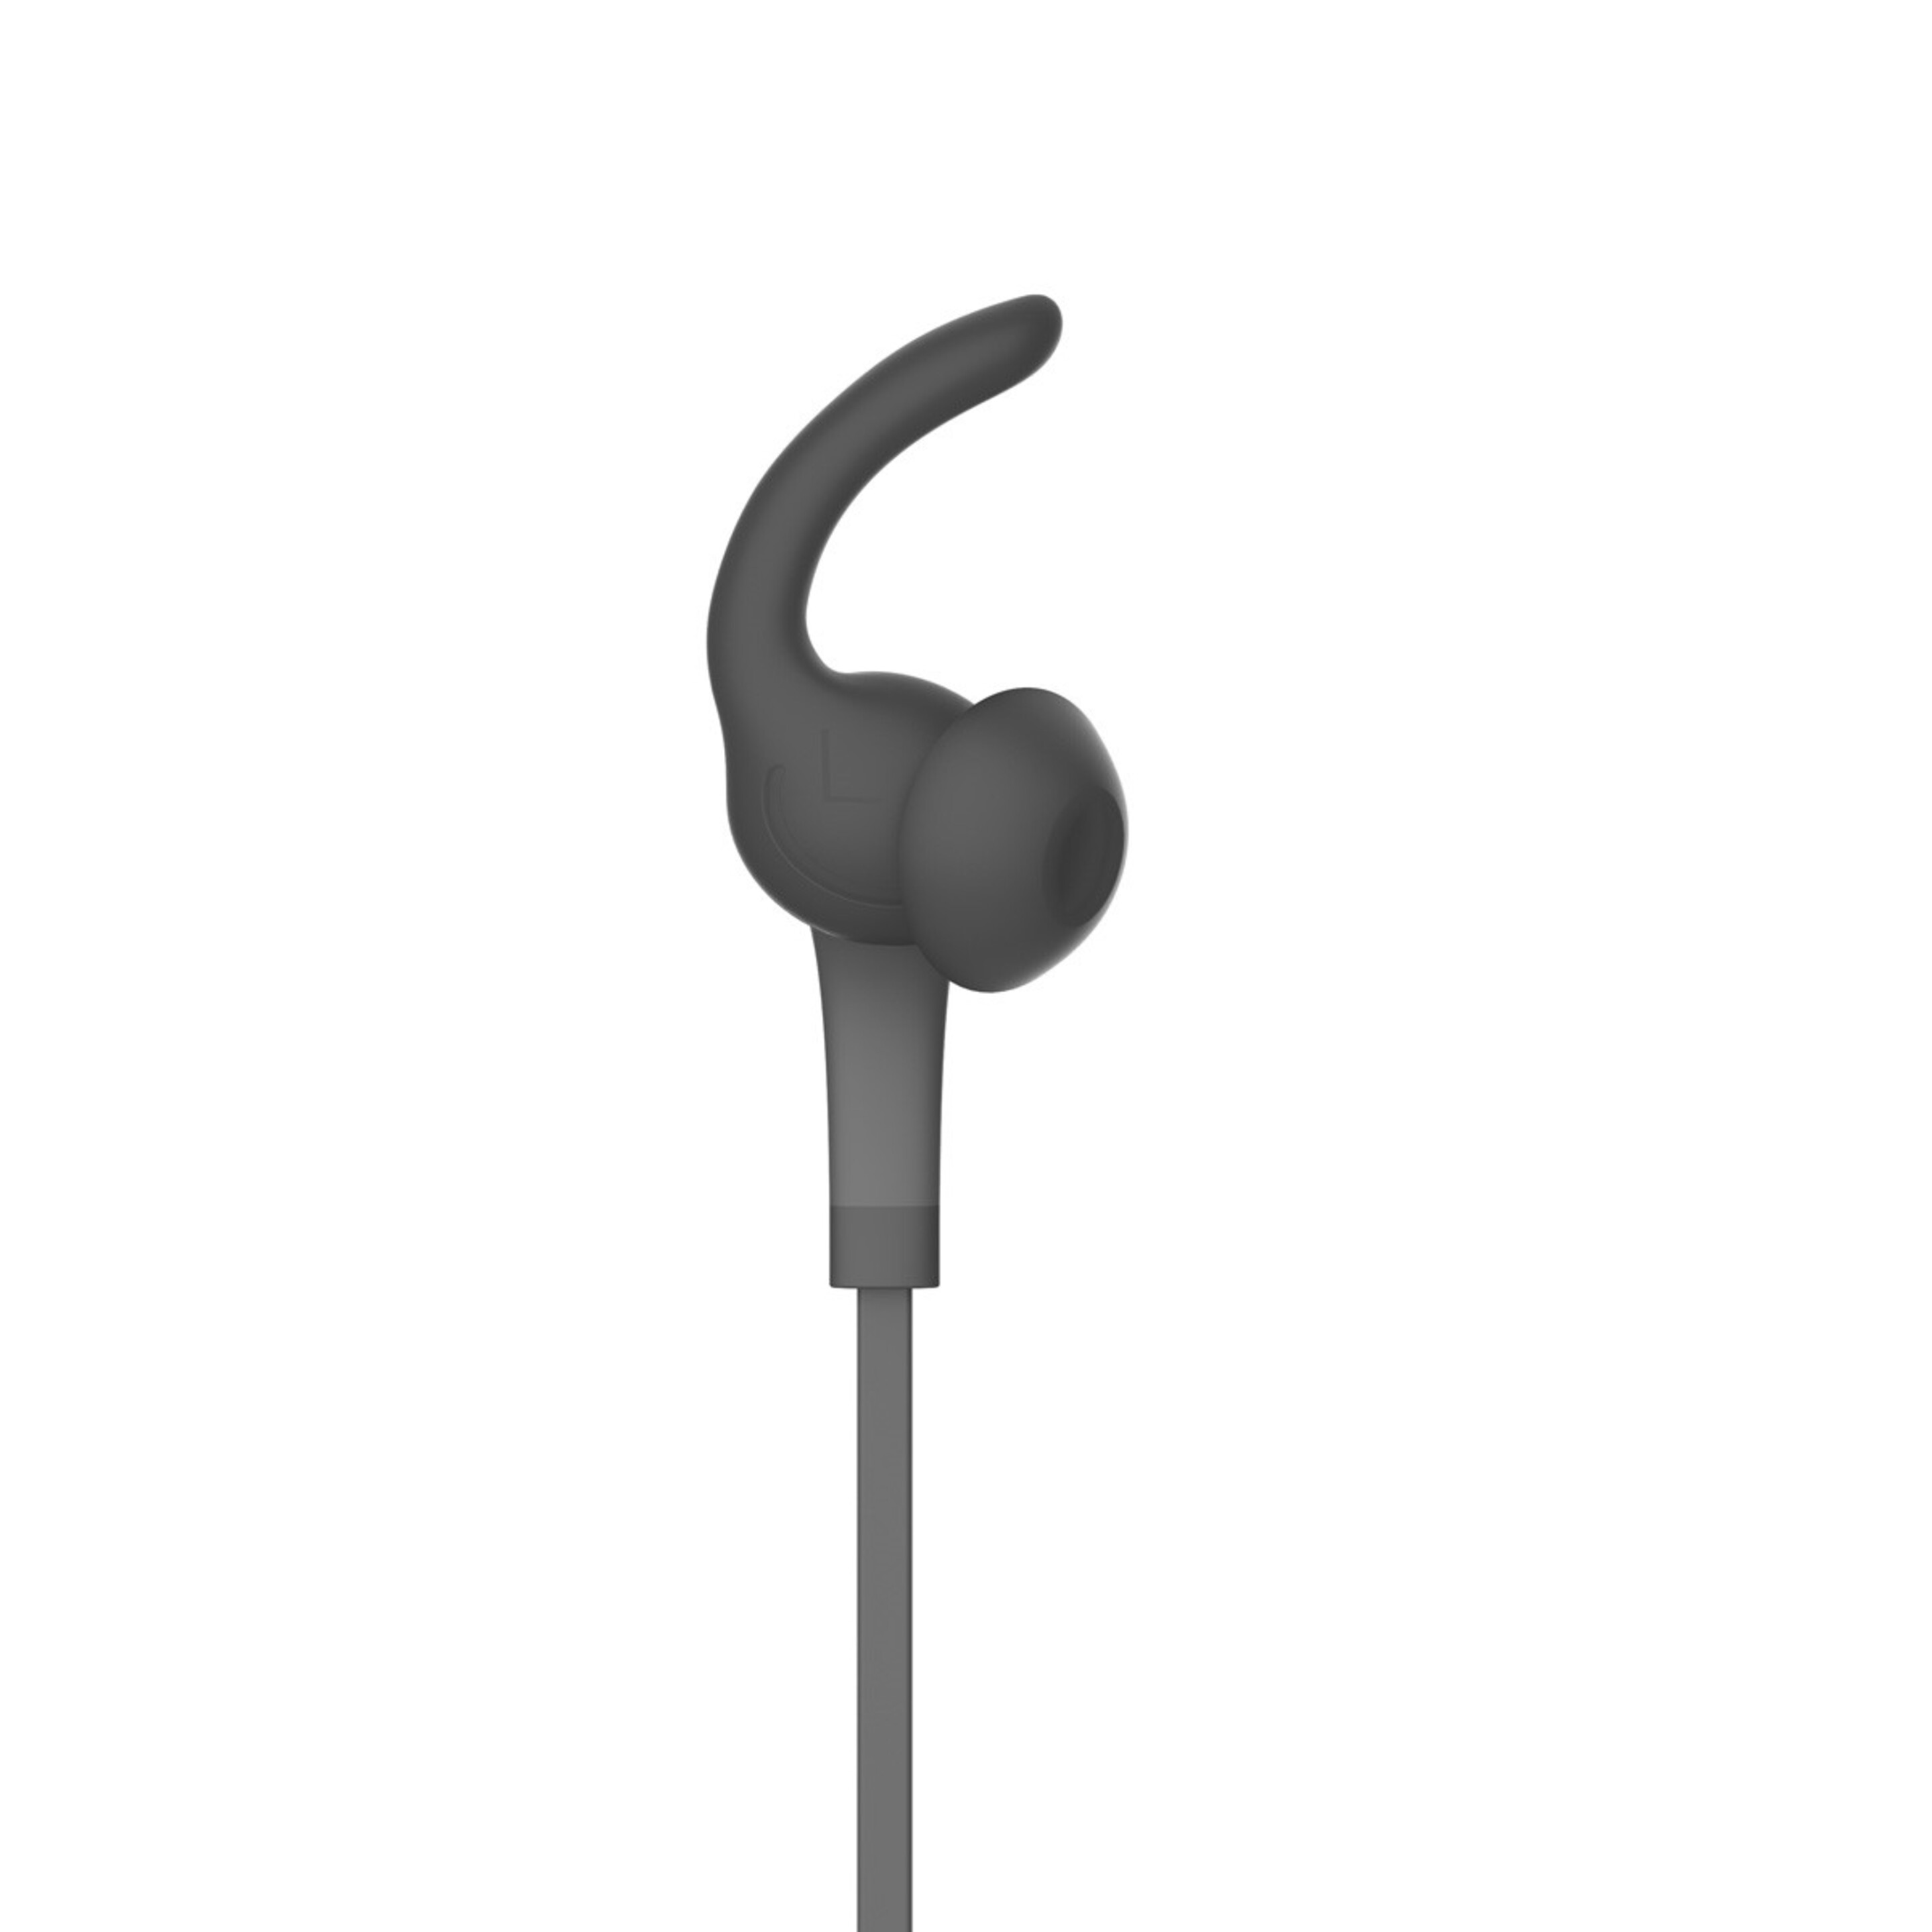 Auriculares Muvit Estéreo M1s3.5mm - negro  MKP